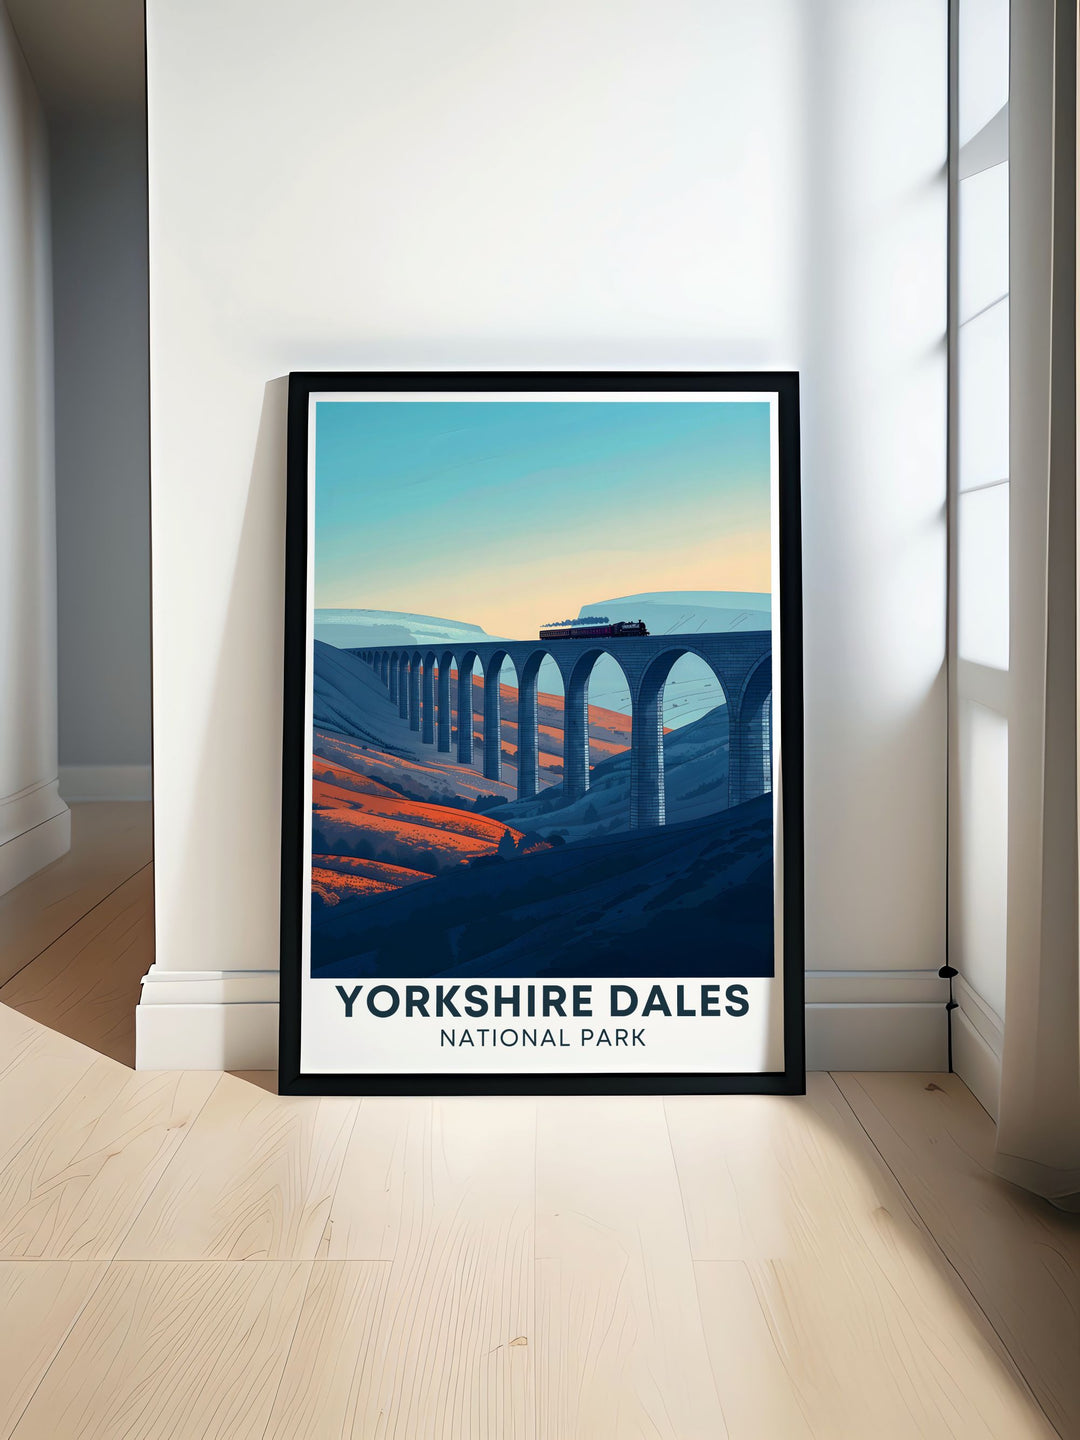 Greece Island Print showcasing the serene beauty of Zakynthos with its charming towns and stunning landscapes complemented by the majestic Ribblehead Viaduct, perfect for home decor inspired by Greece.